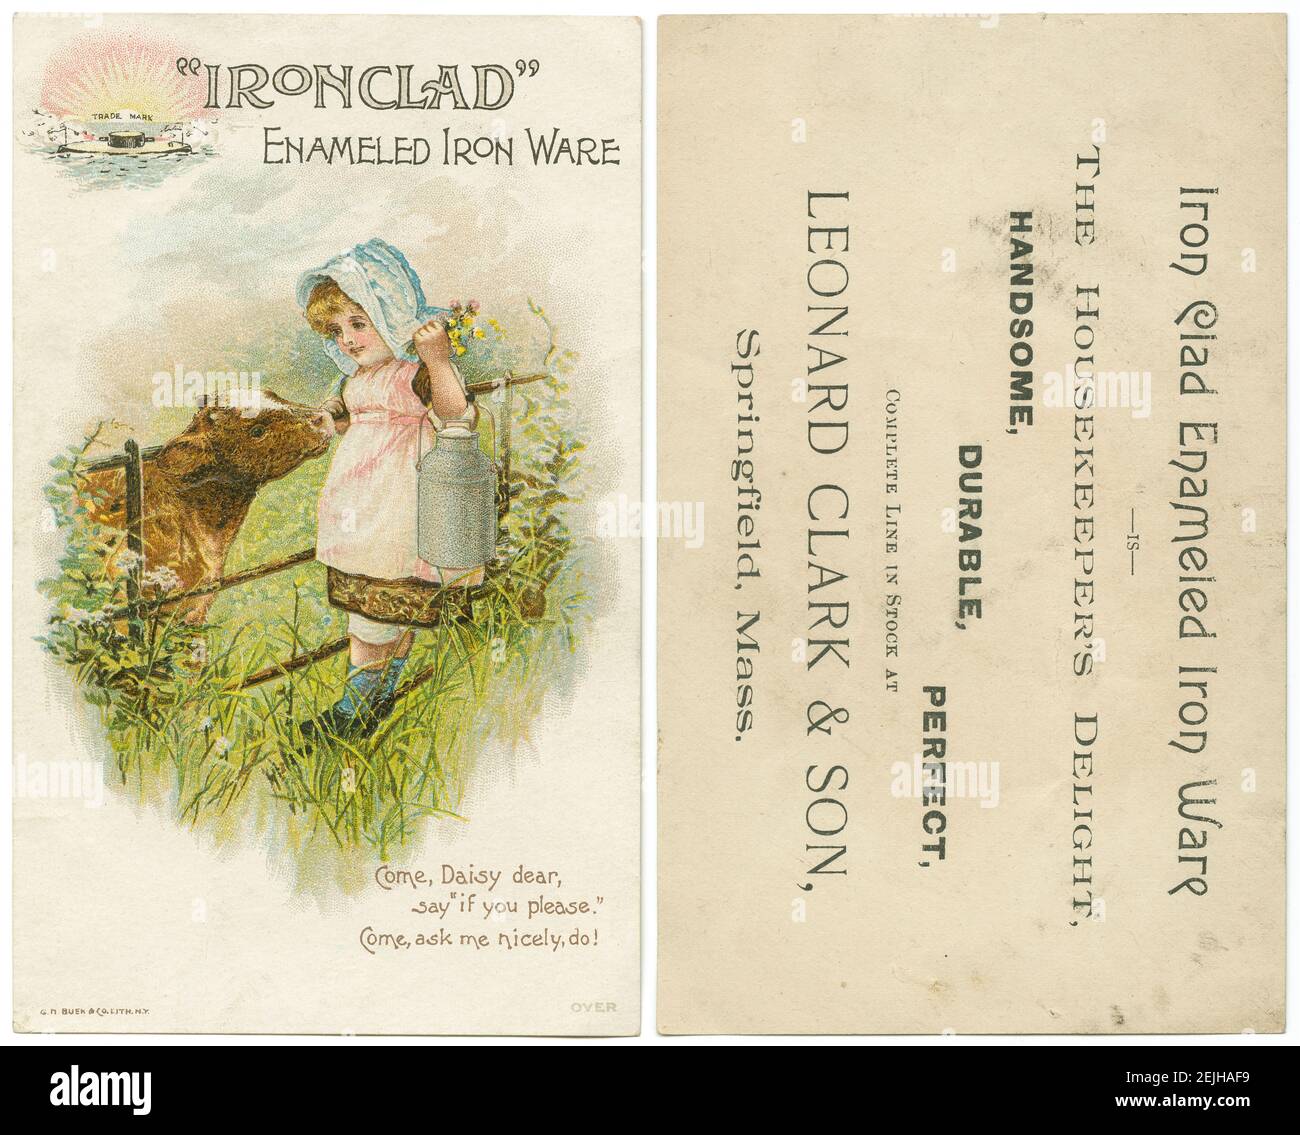 Antique c1890 chromolithographic trade card (front and back) for retailer Leonard Clark & Son in Springfield, Massachusetts for “Enameled Iron Ware” by Iron Clad Manufacturing Co. in Brooklyn, New York. Nellie Bly, American journalist, was head of the company after 1900. SOURCE: ORIGINAL TRADE CARD Stock Photo